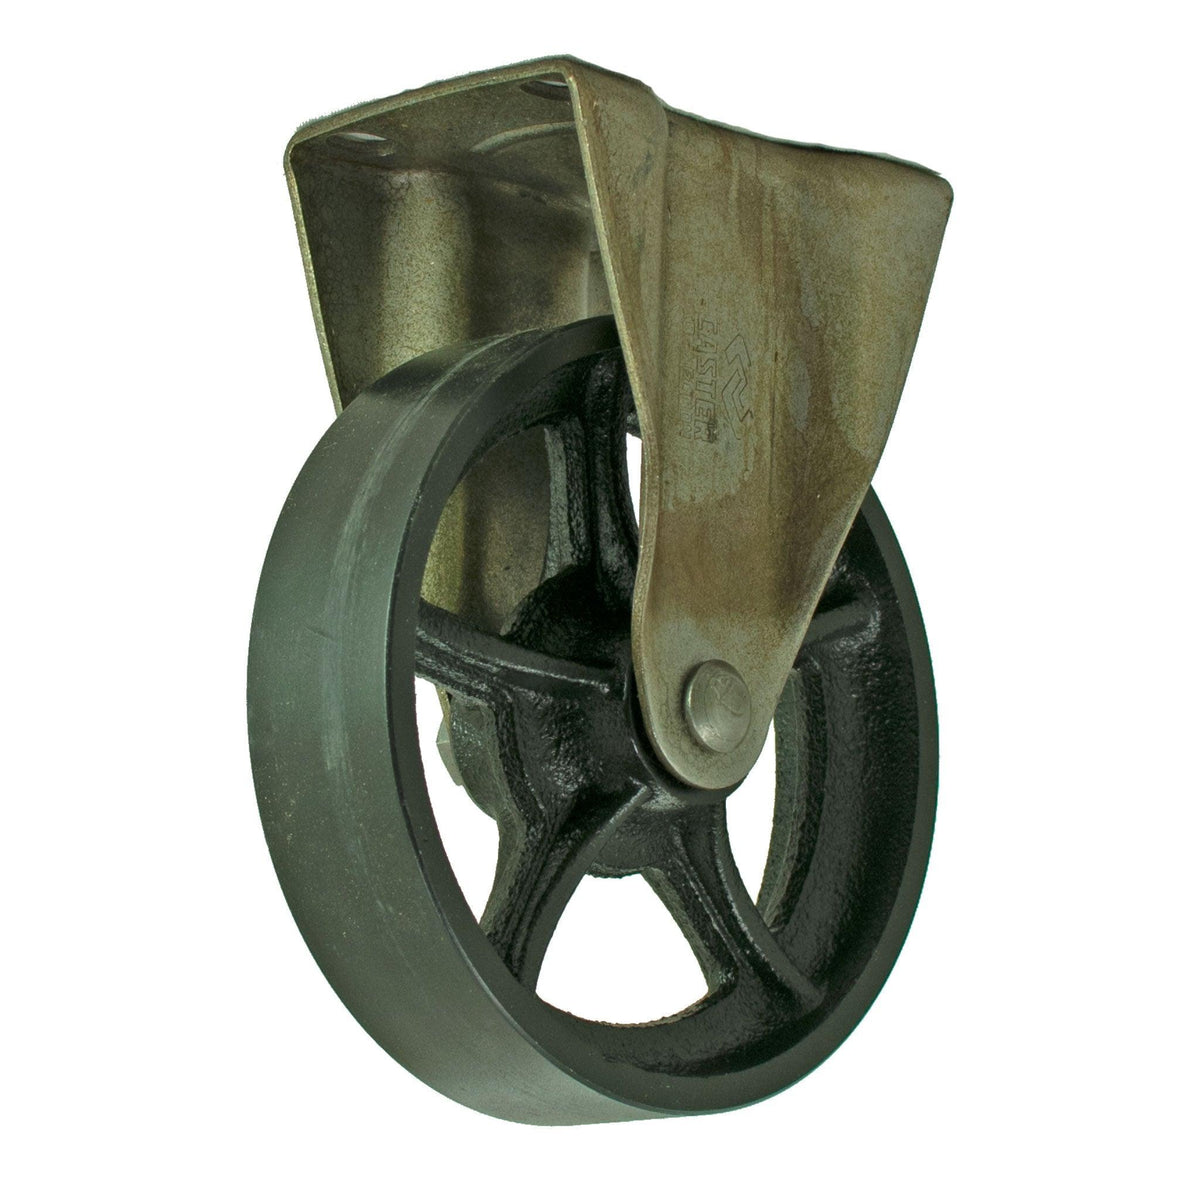 6in Vintage Casters are non-swivel wheels